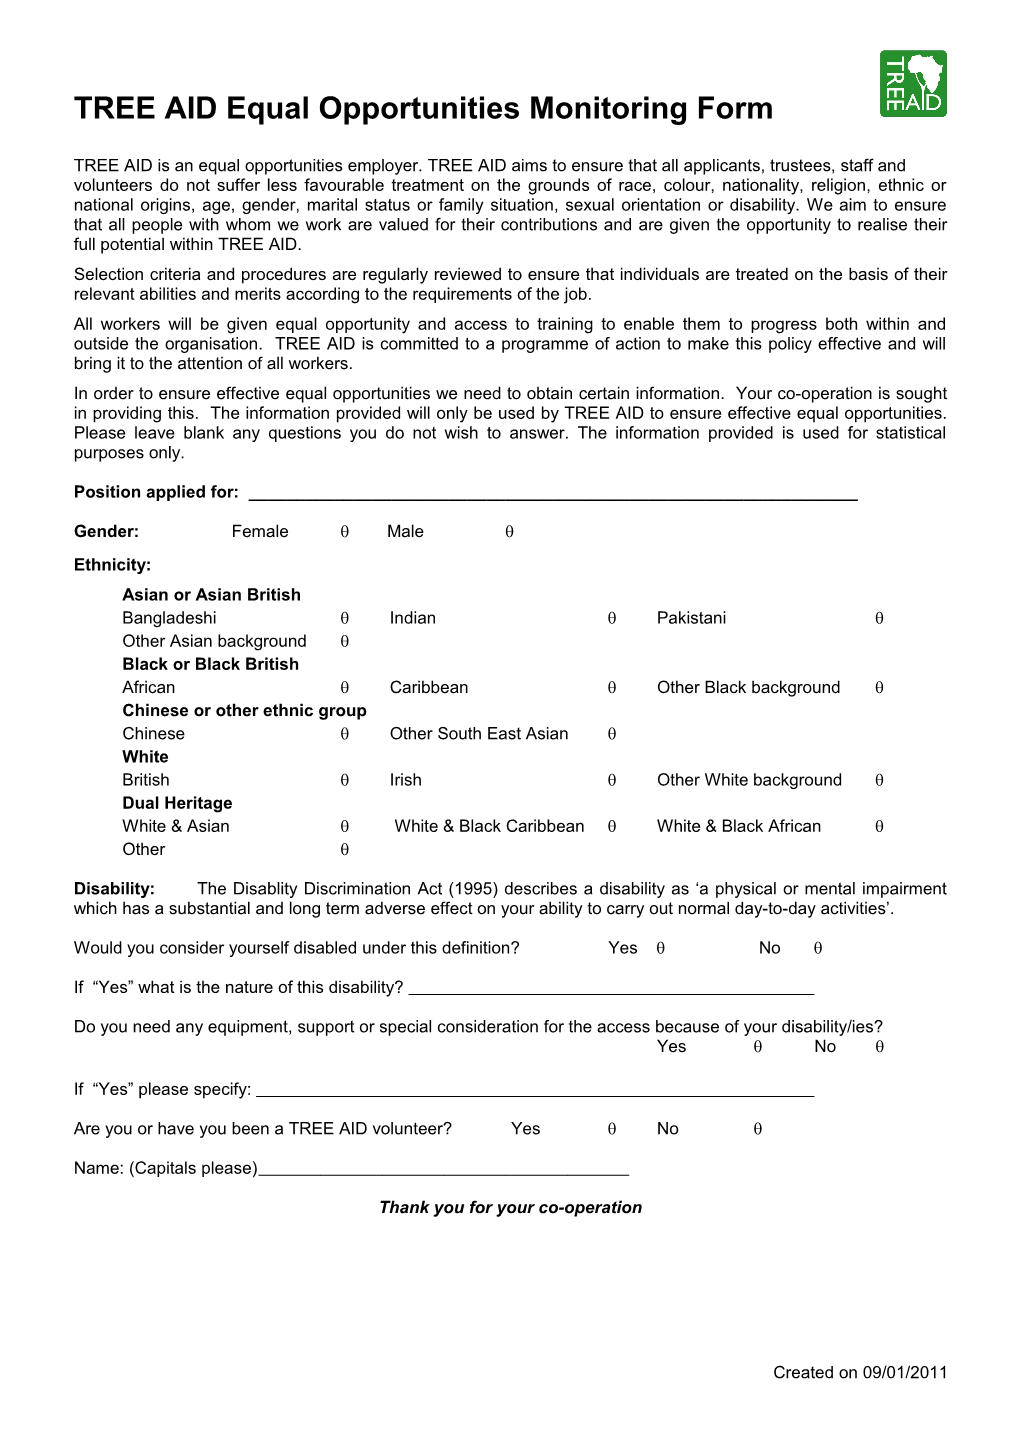 TREE AID Equal Opportunities Monitoring Form